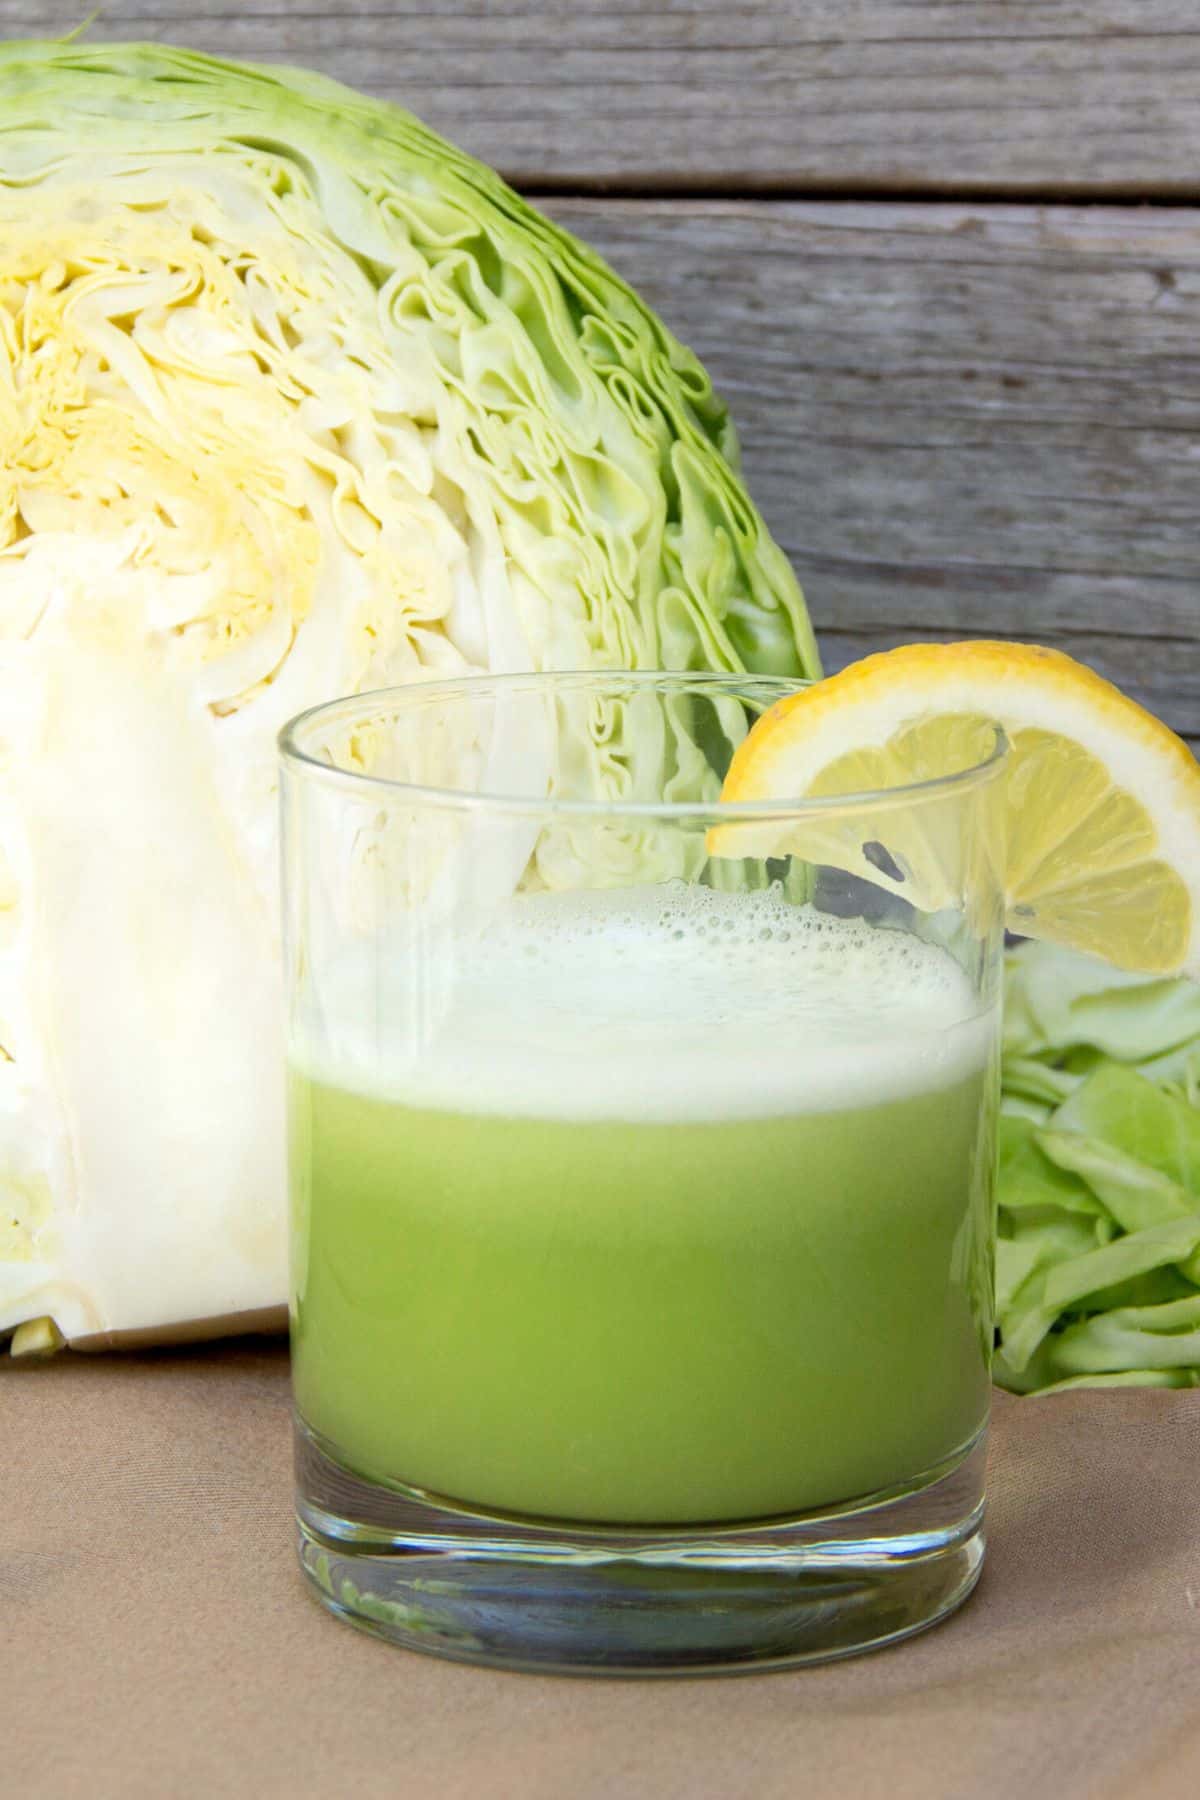 A glass of cabbage juice in front of a halved cabbage head.